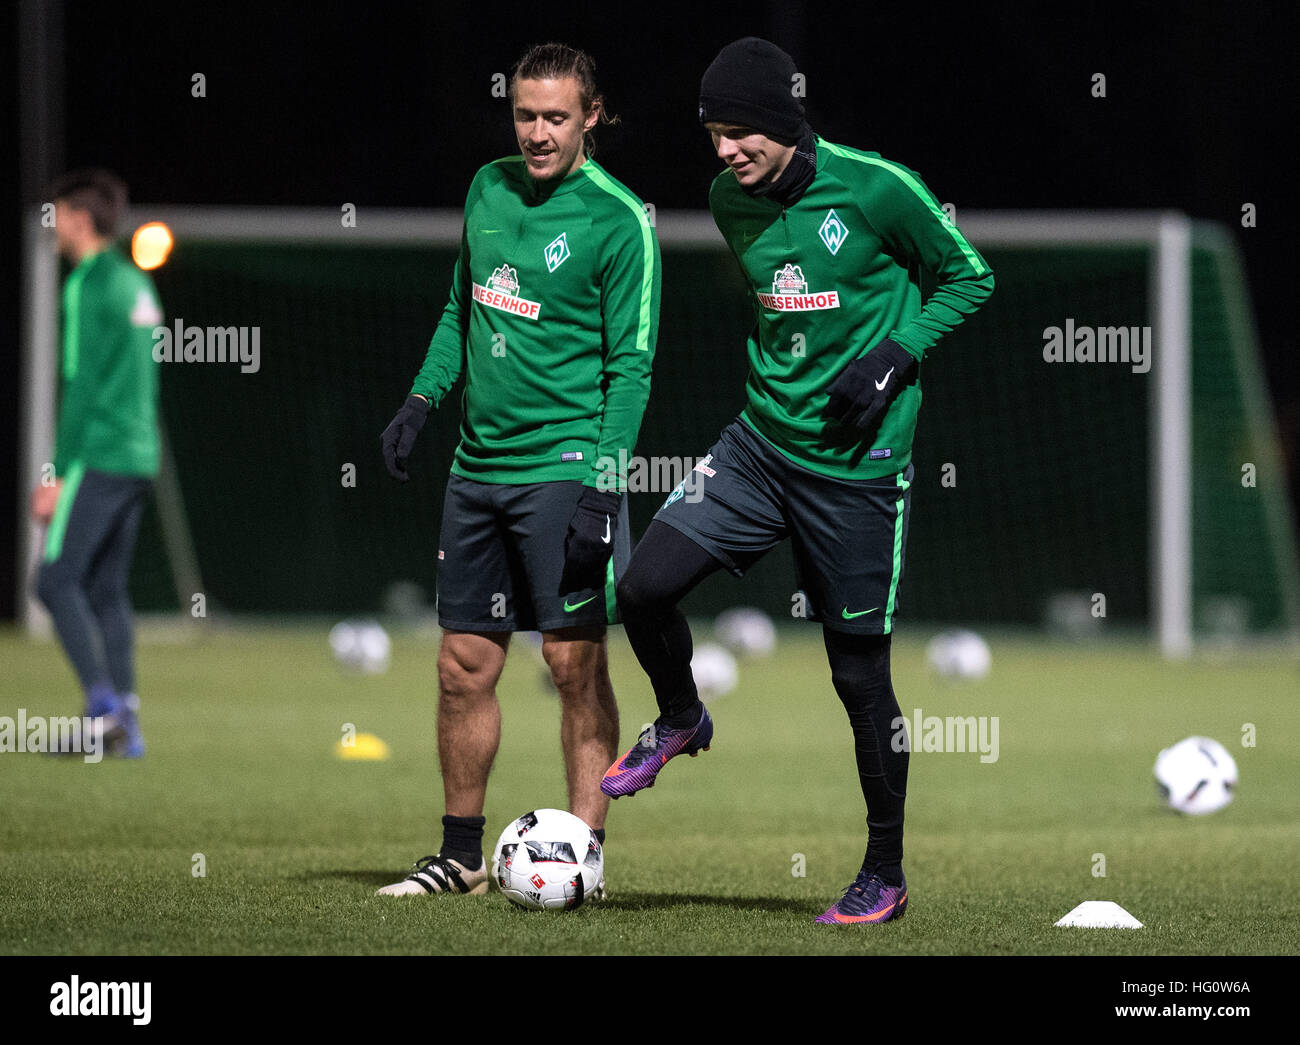 Bremen, Germany. 2nd Jan, 2017. Max Kruse (l) and Aron Johannsson of the Bundesliga soccer club Werder Bremen in action during the first training session for the second half of the season in Bremen, Germany, 2 January 2017. Photo: Ingo Wagner/dpa/Alamy Live News Stock Photo